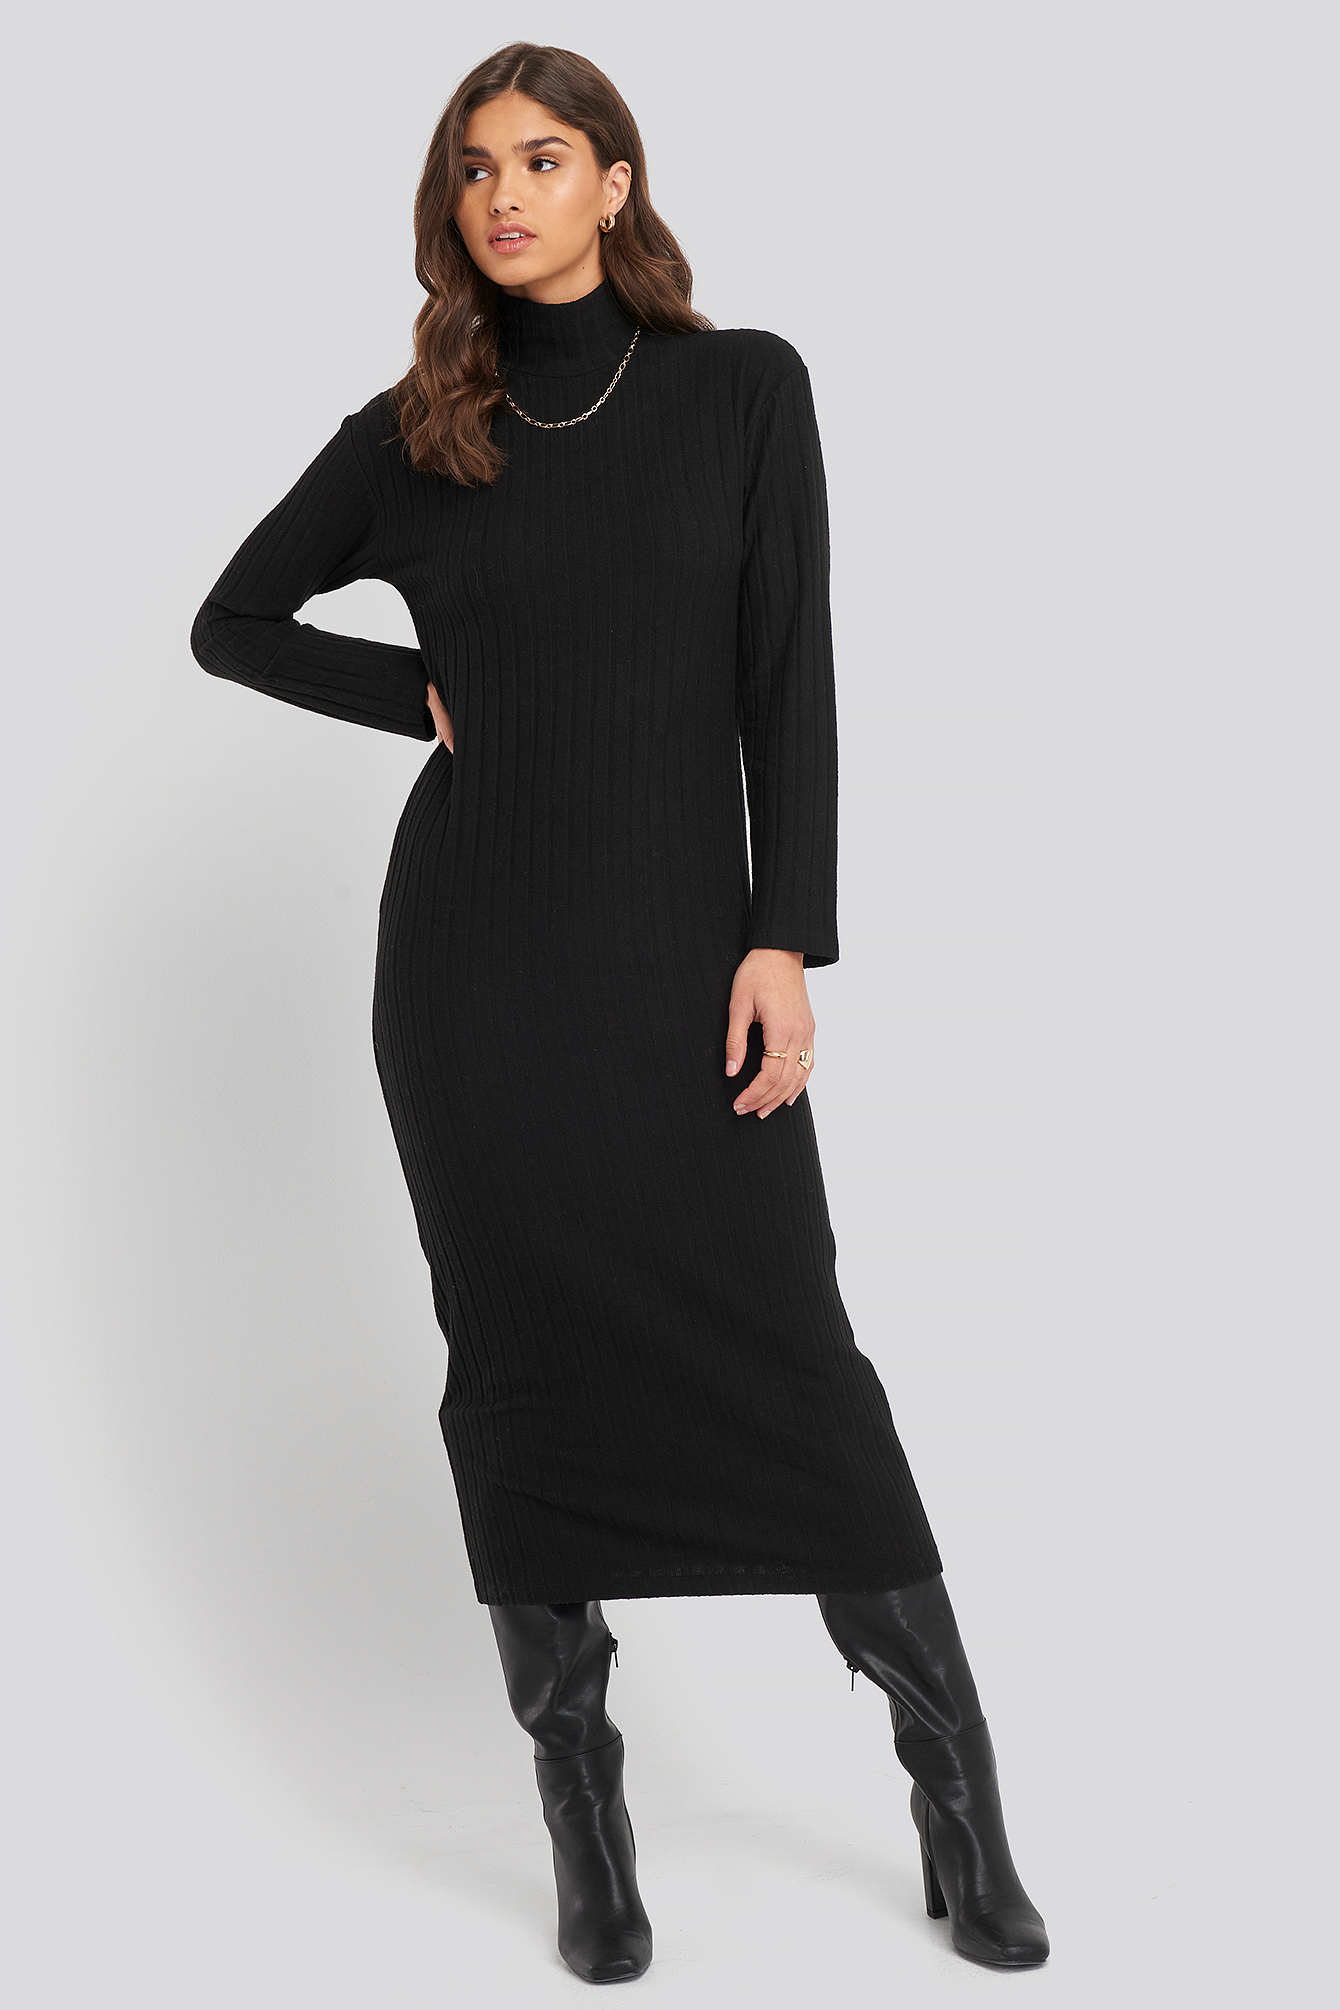 NA-KD Trend High Neck Ribbed Ankle Length Knitted Dress - Black